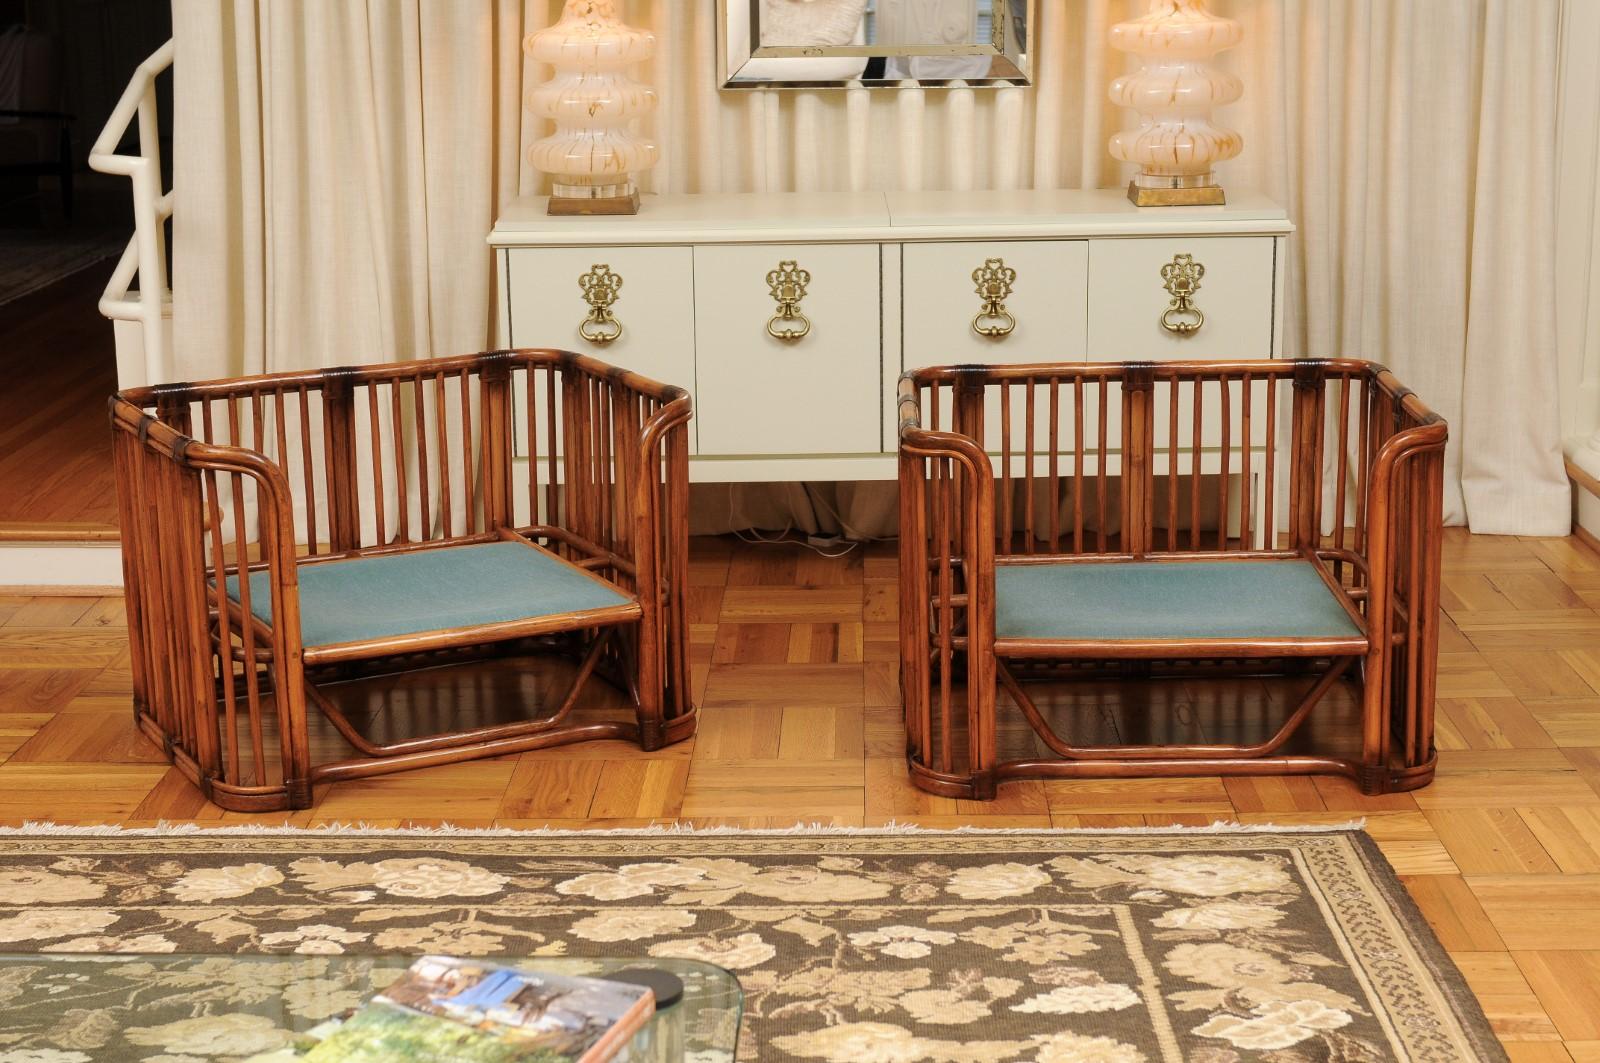 These magnificent lounge chair frames are shipped as professionally photographed and described in the listing narrative: Meticulously professionally restored and ready for upholstery. Expert custom upholstery service is available.

A fabulous pair